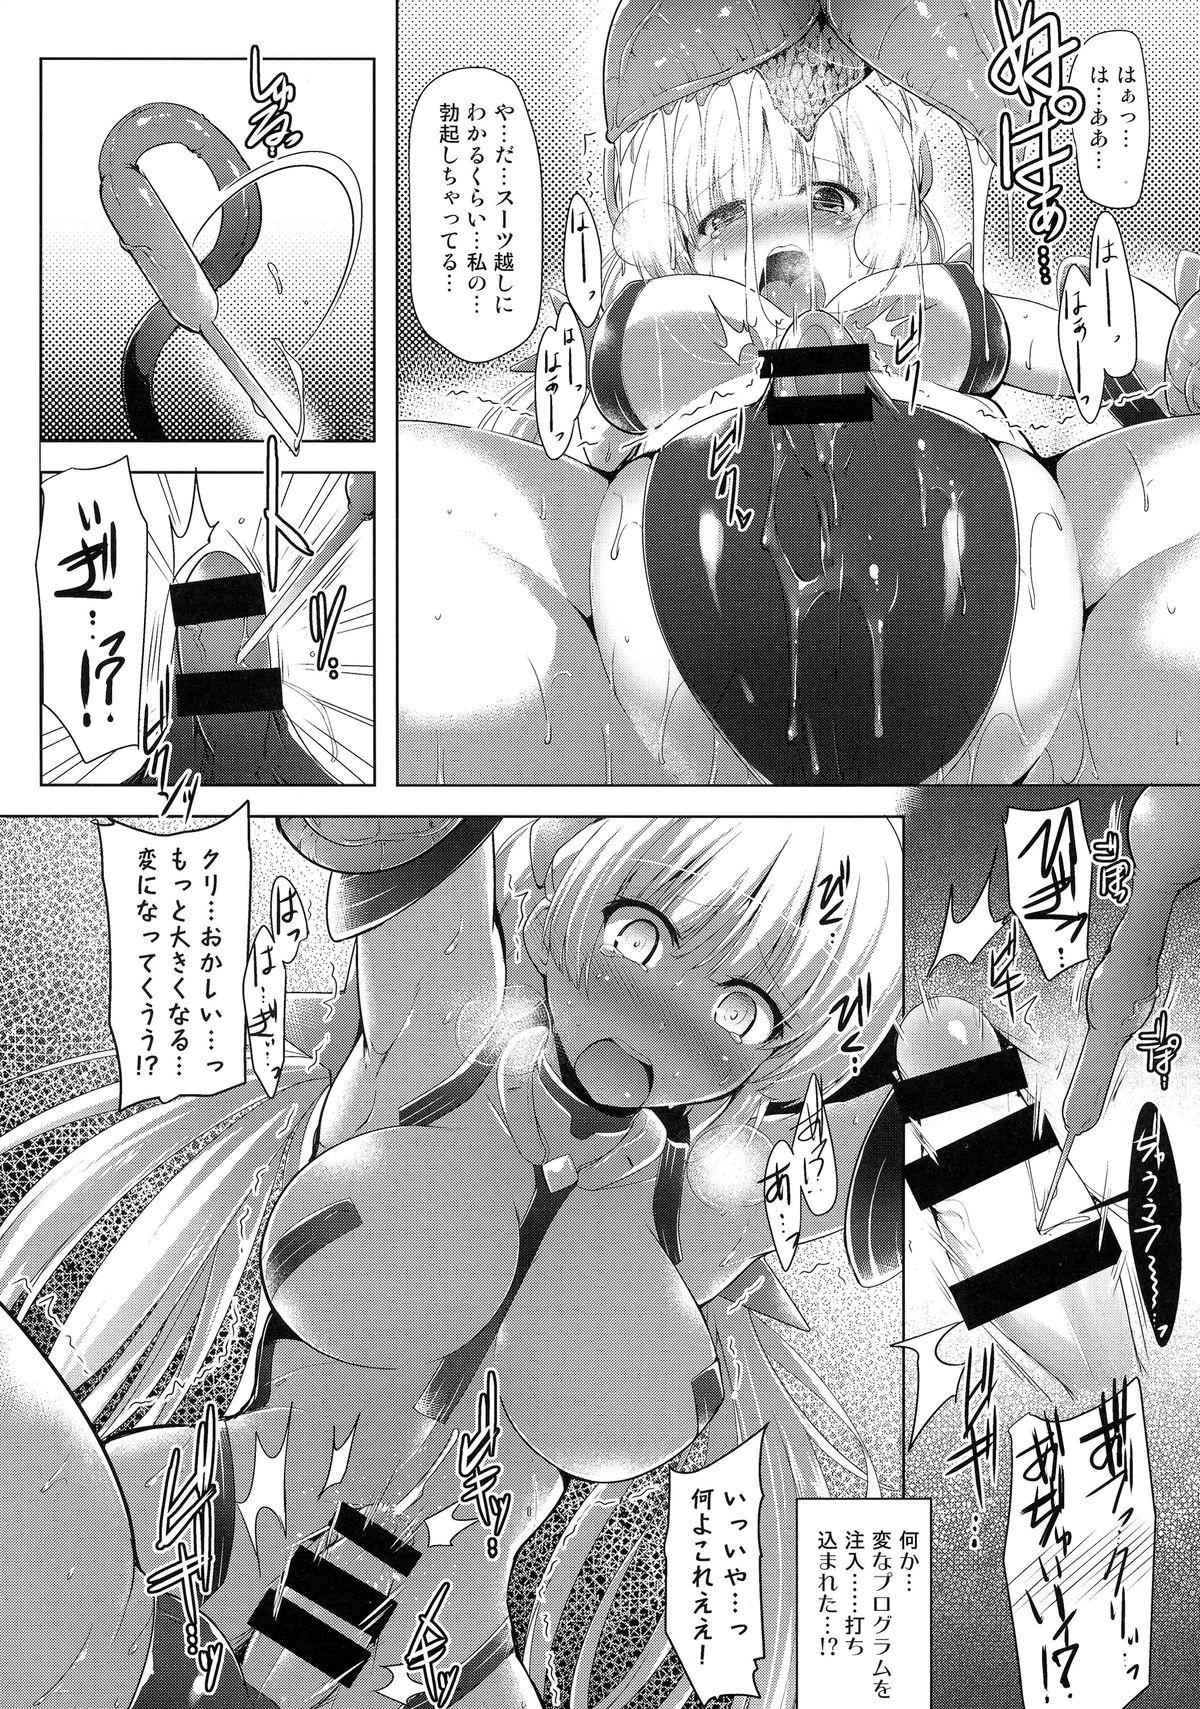 Top K.231 - Expelled from paradise Hardcore - Page 8